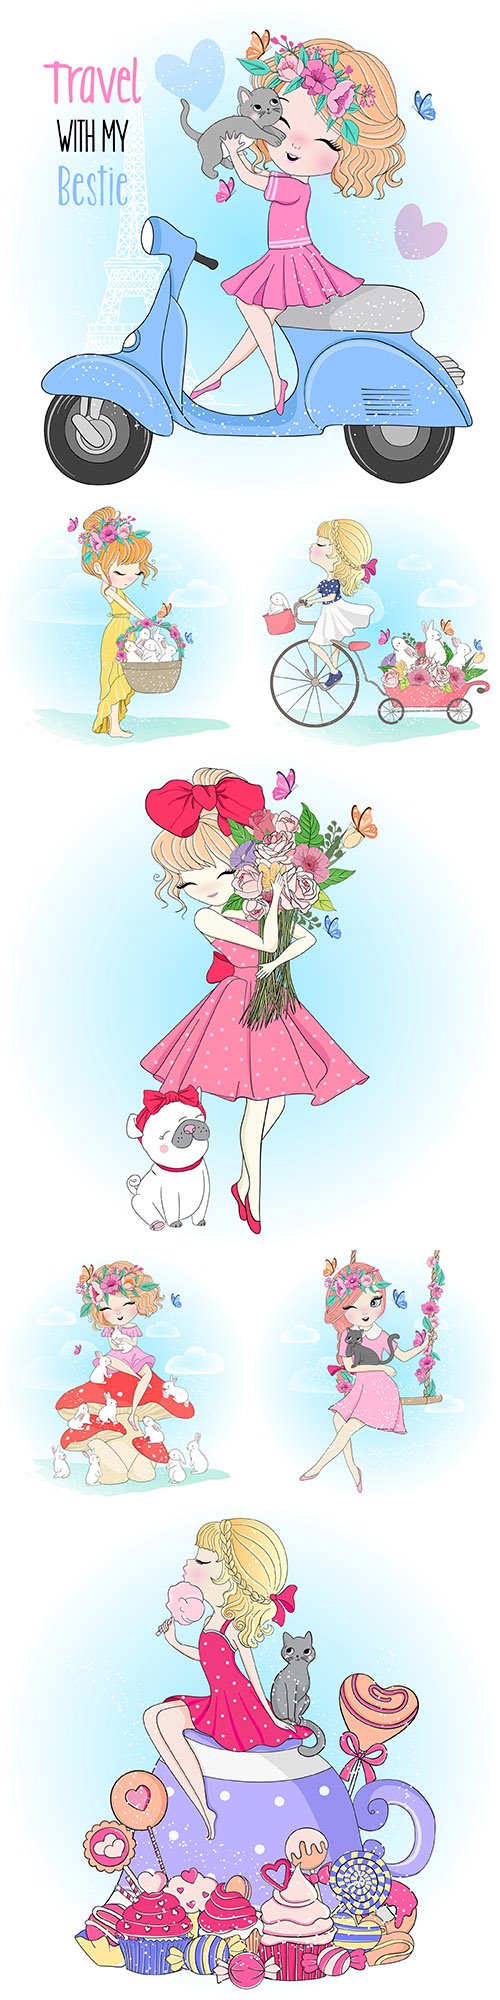 Cute girl with flowers and animals painted illustration